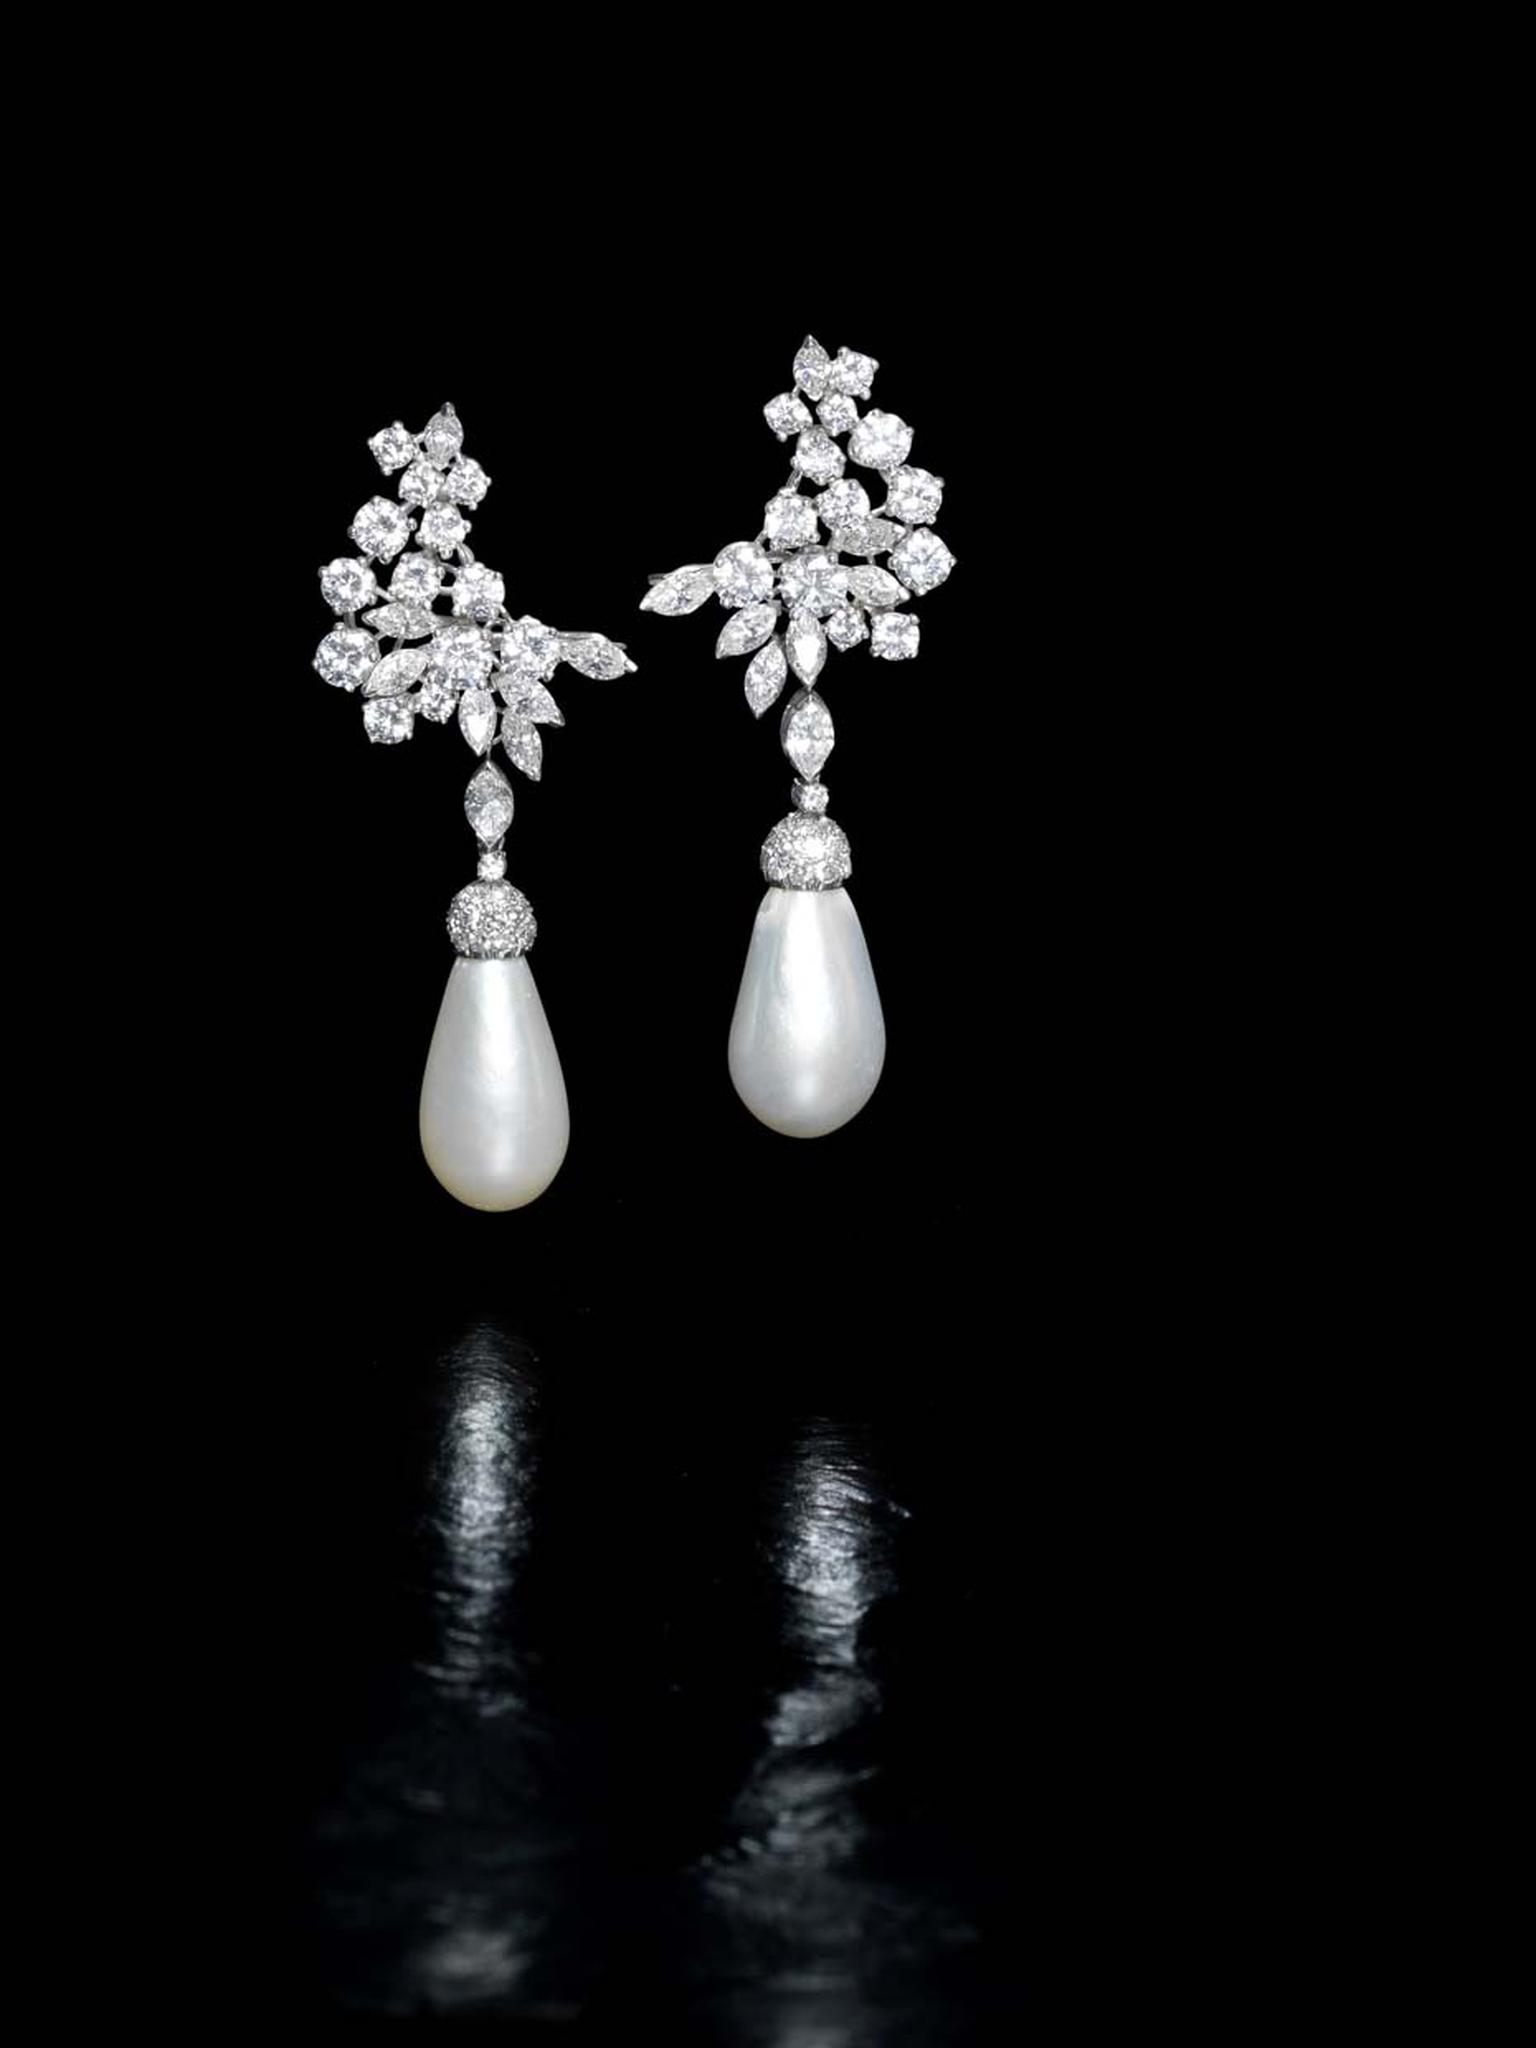 Lot 188, a pair of natural pearl and diamond (6ct) pendant earrings. Sold for £290,500 (estimate: £150,000-200,000)